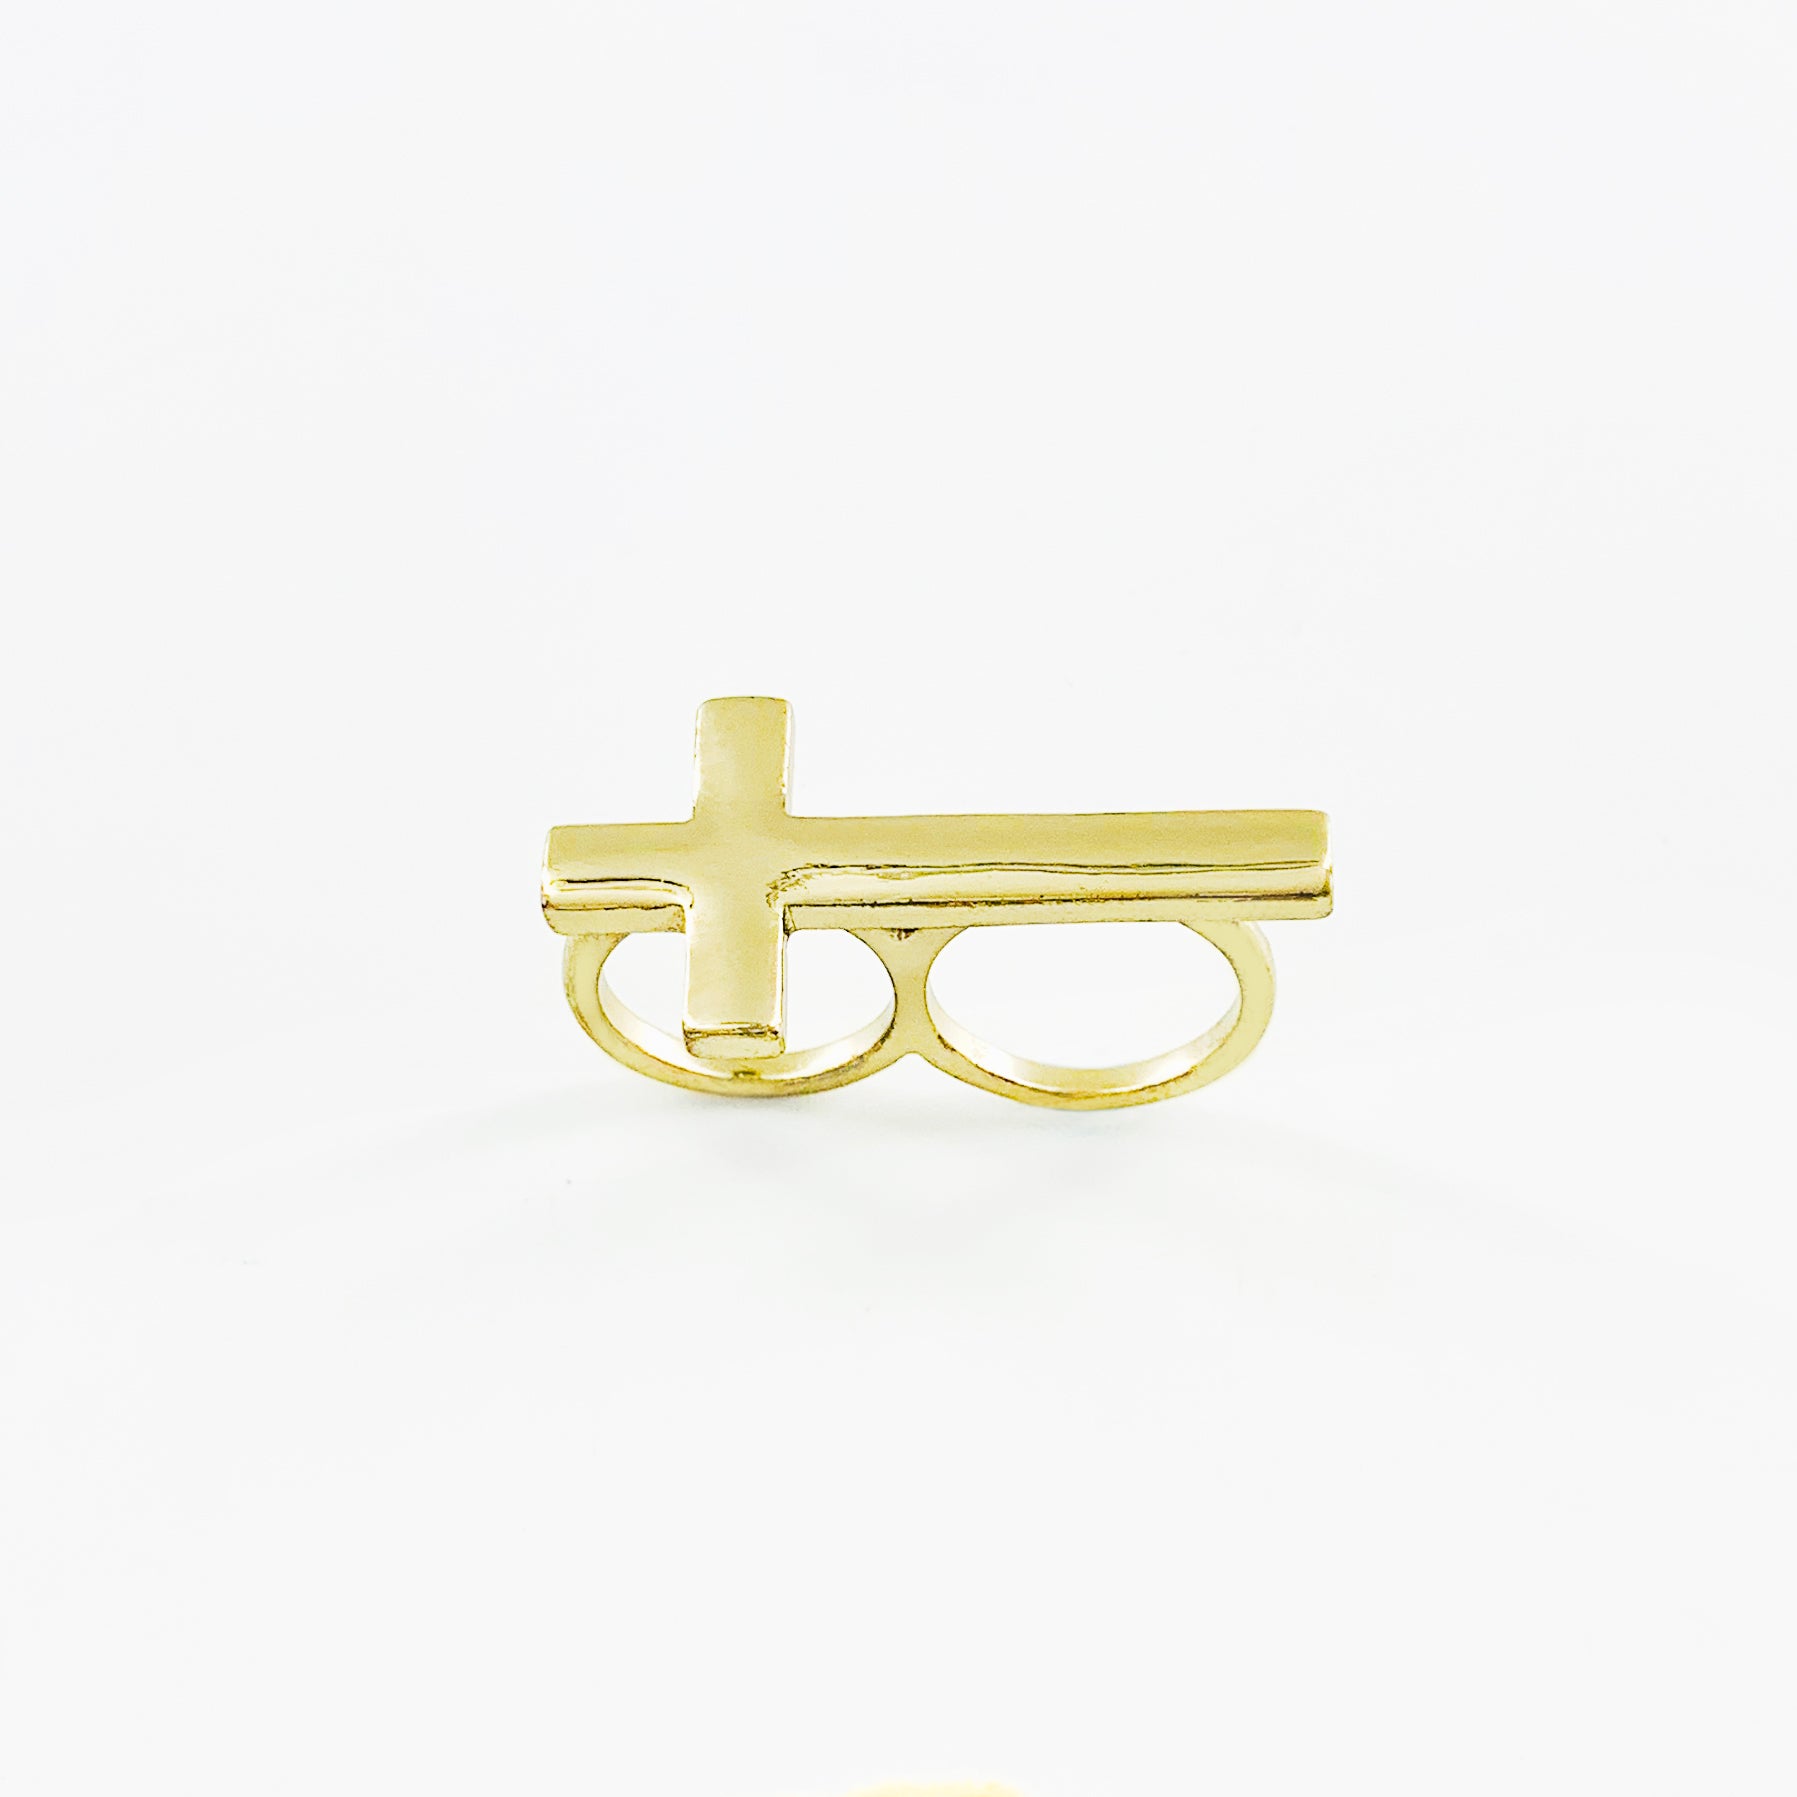 Gold ring with cross design